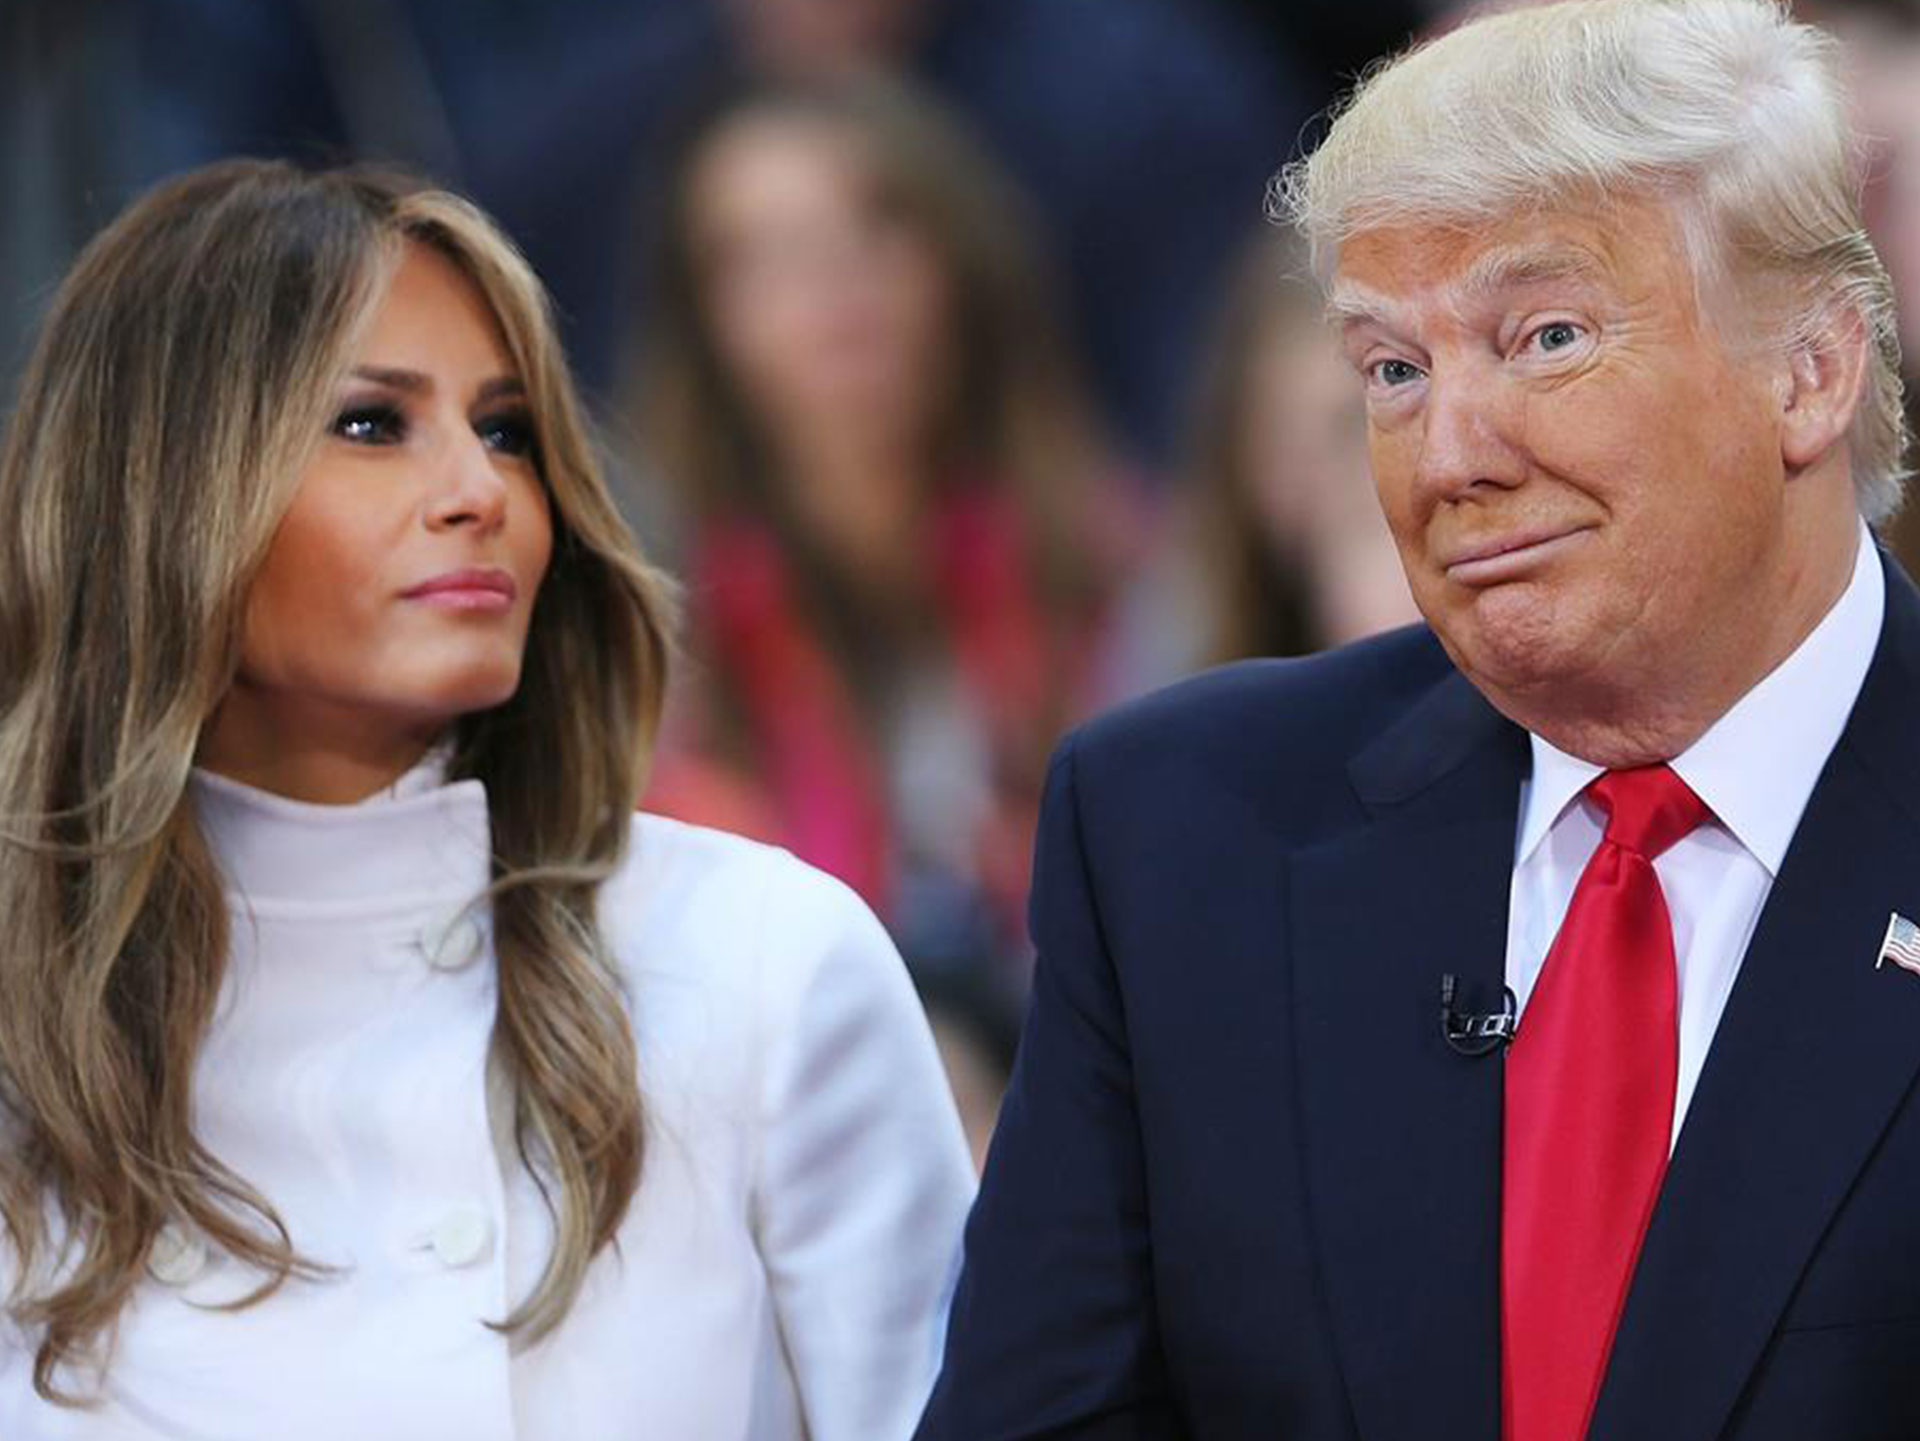 Melania Trump wins damages over The Daily Mail’s false escort claims